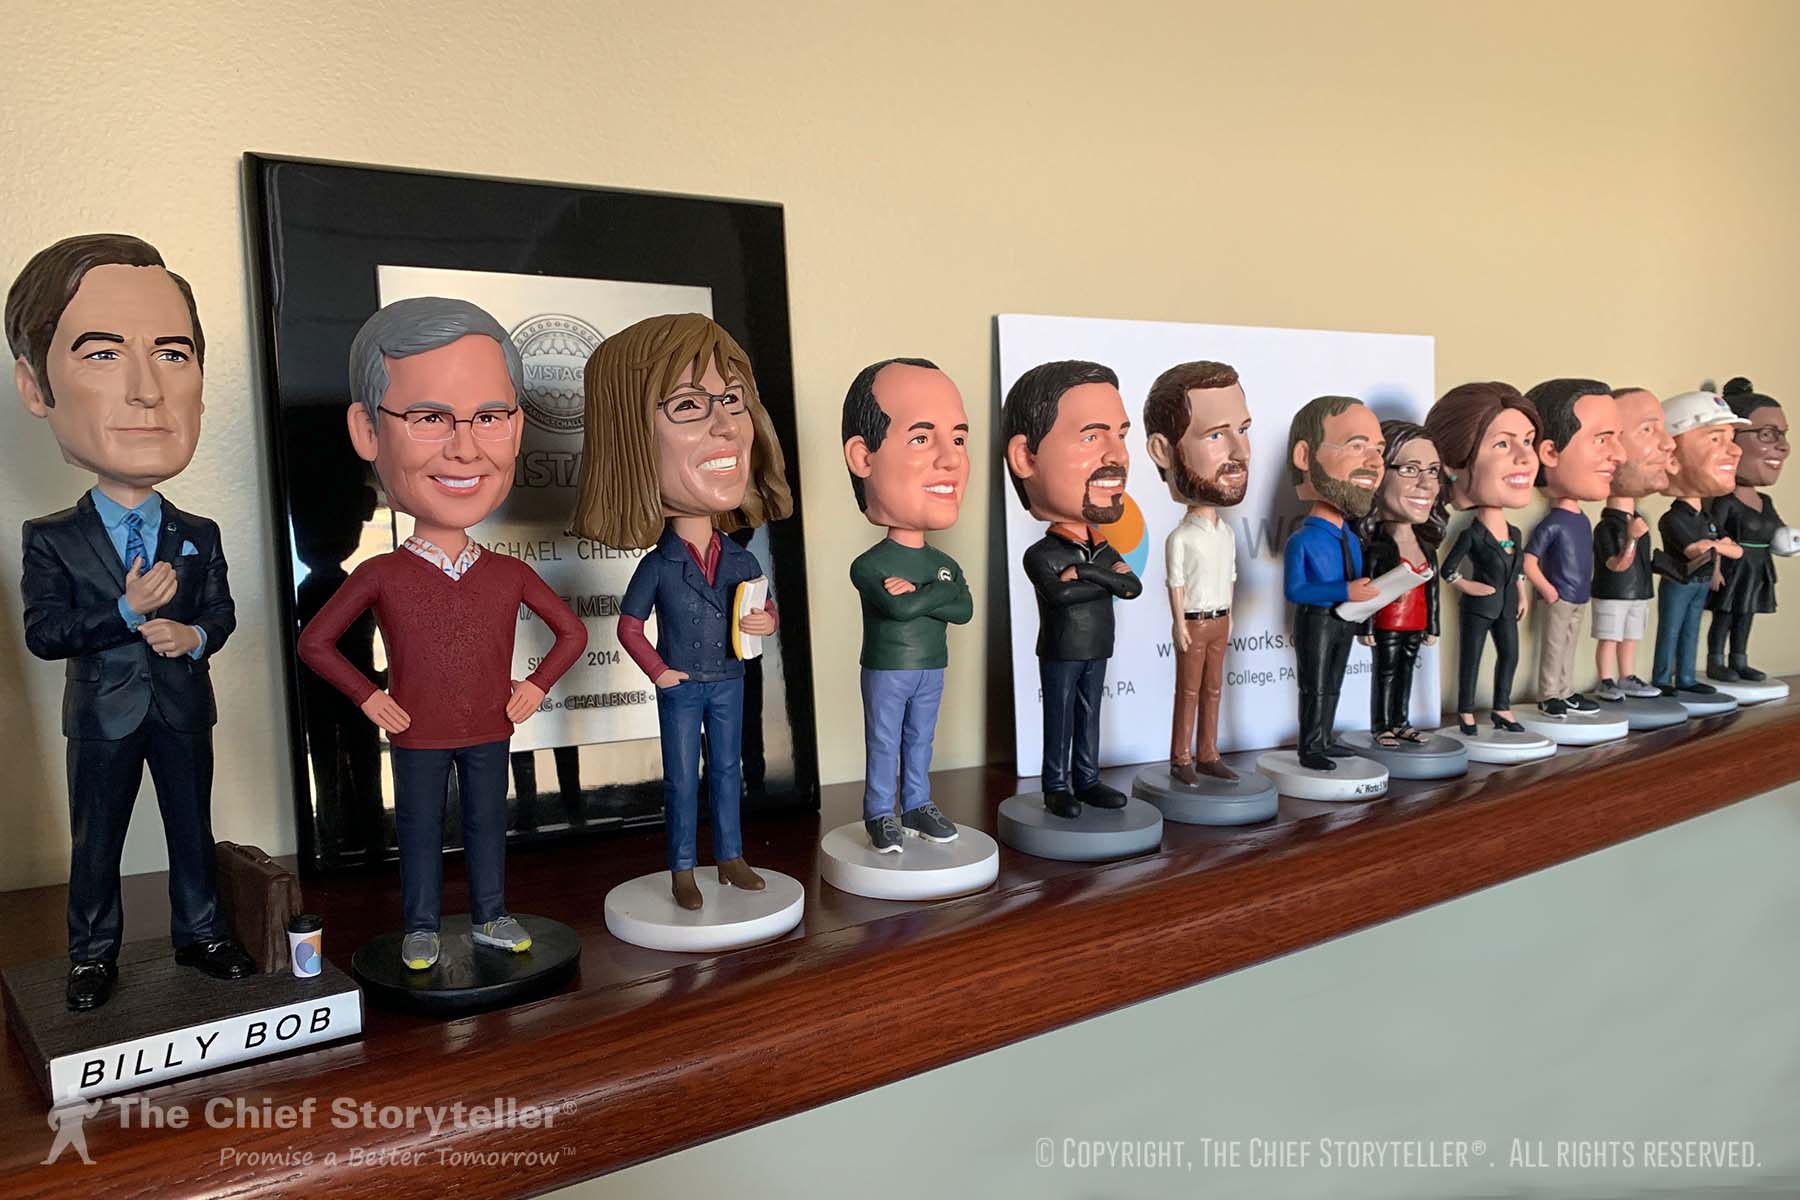 bobble heads awarded at five-year anniversary - example of a symbol